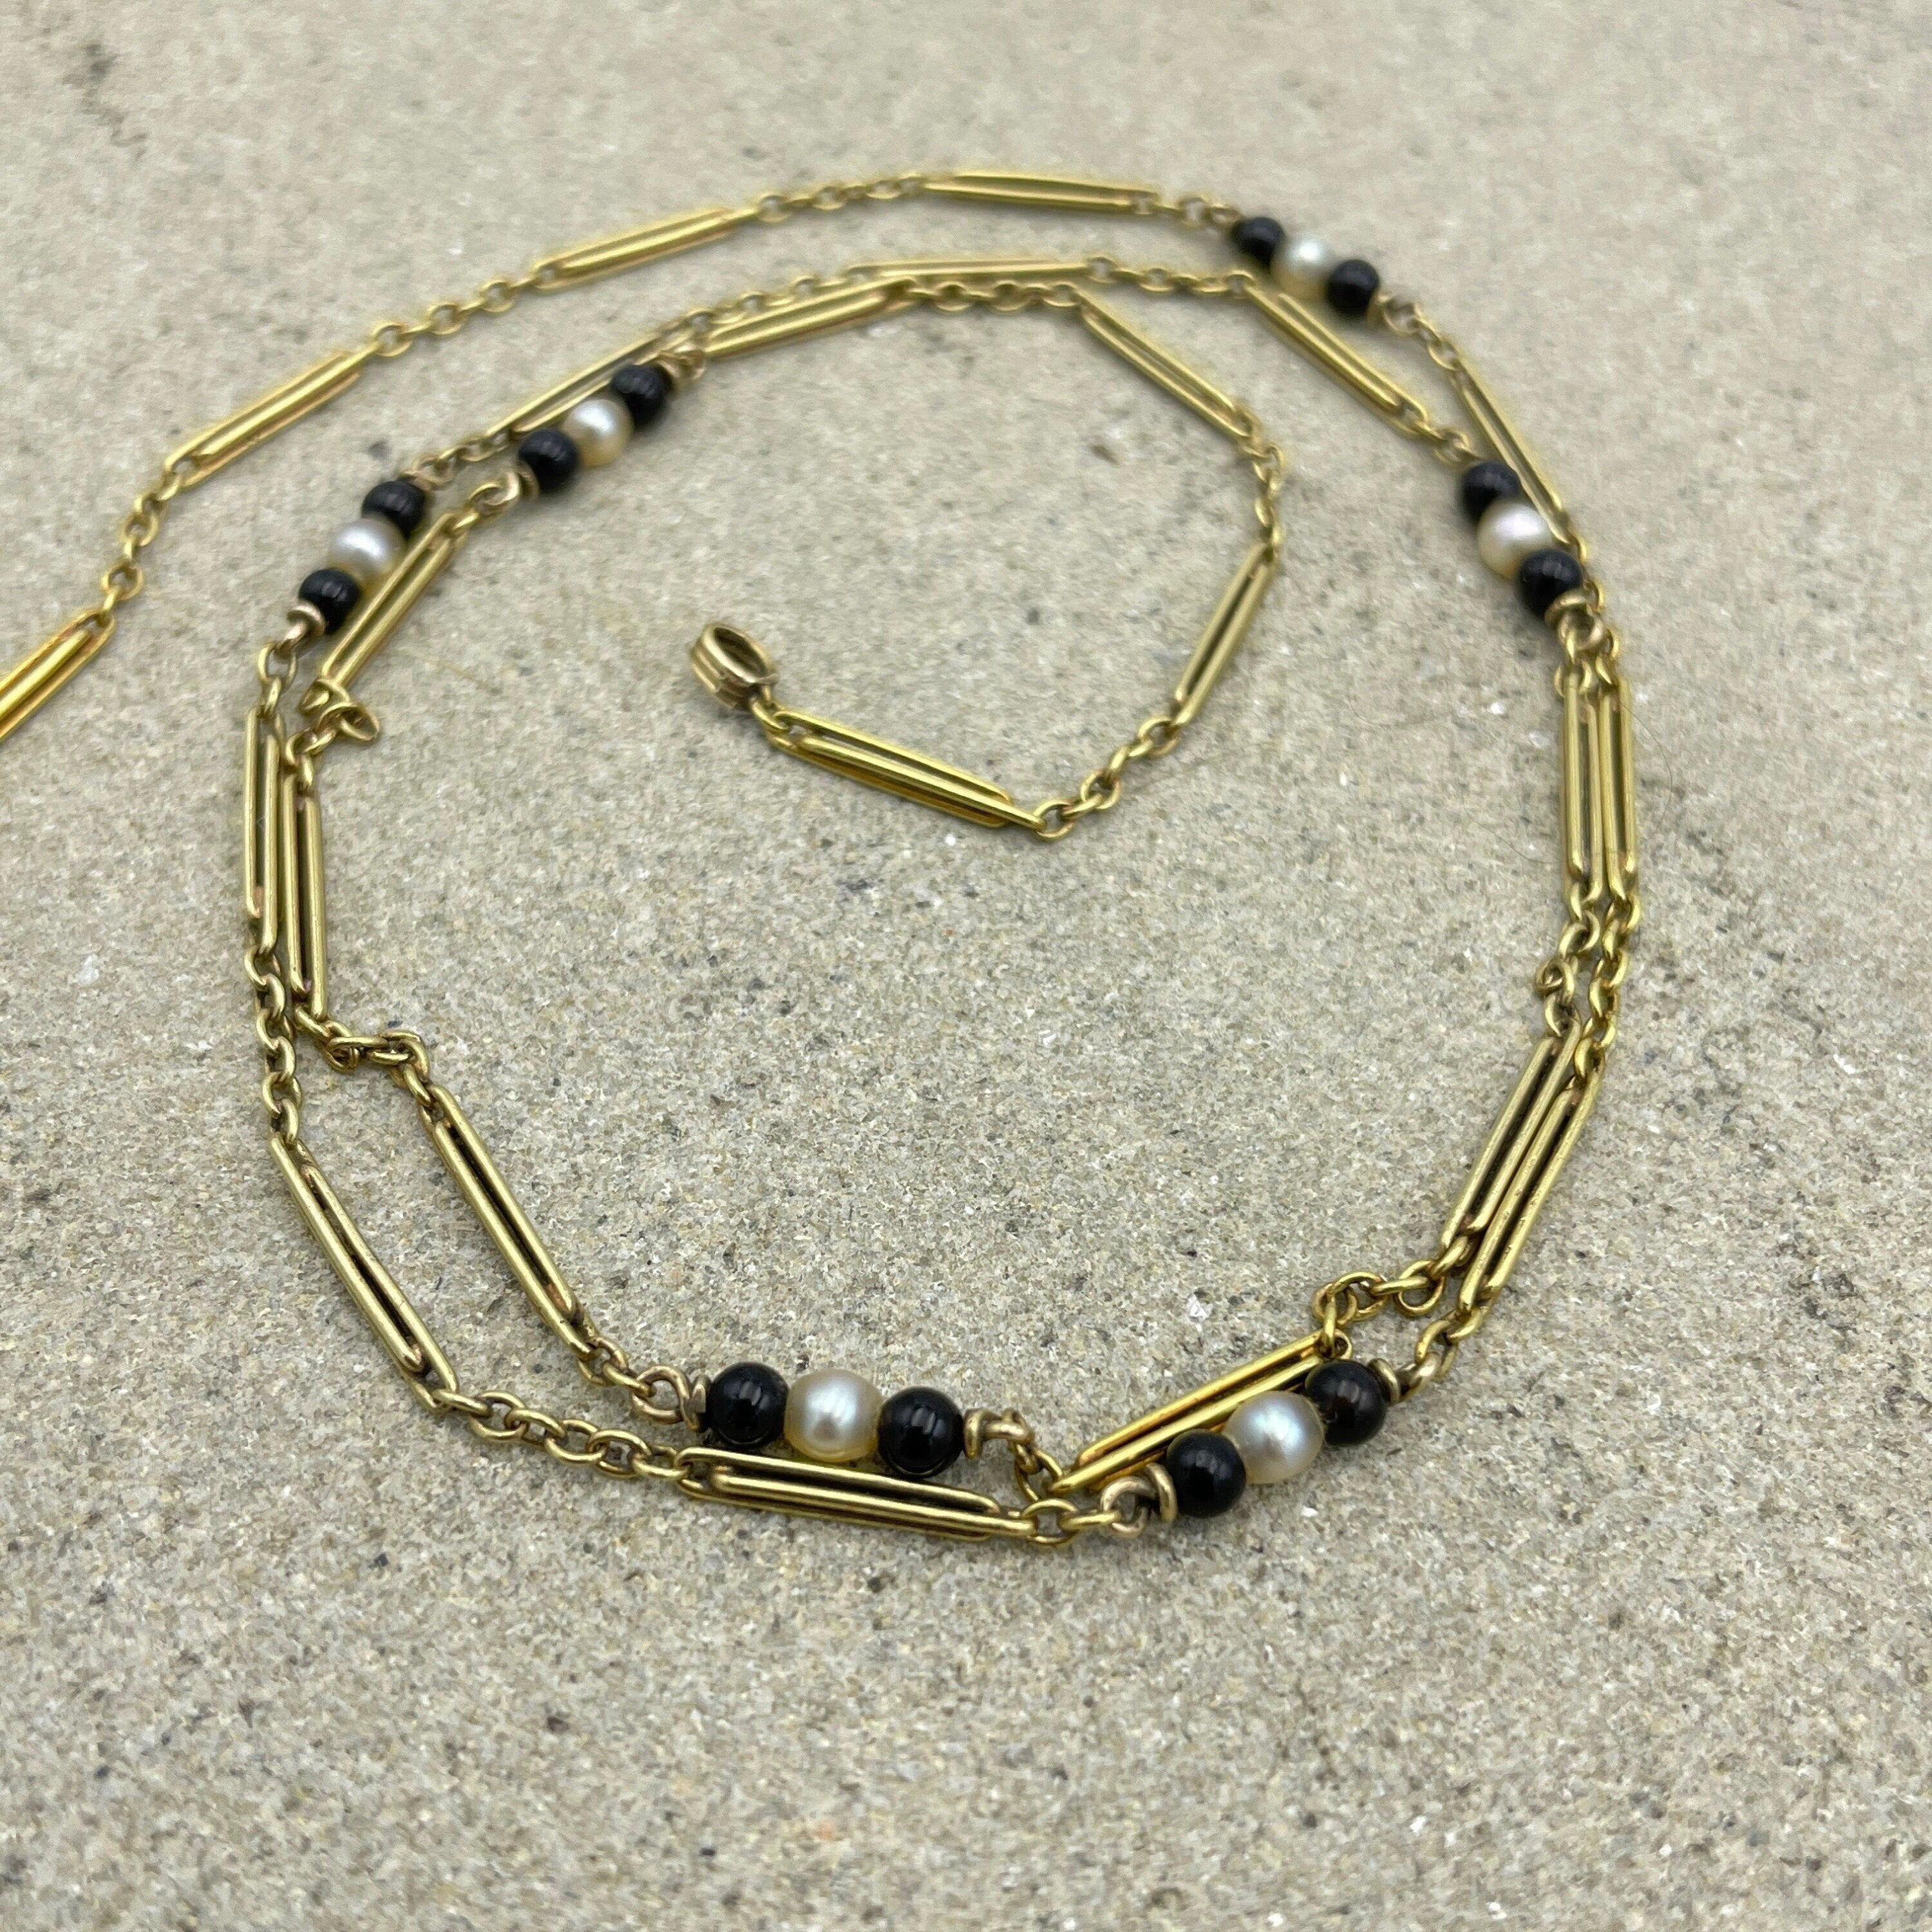 Antique 14ct Gold, Pearl & Black Onyx Bead Fancy Link Chain Necklace